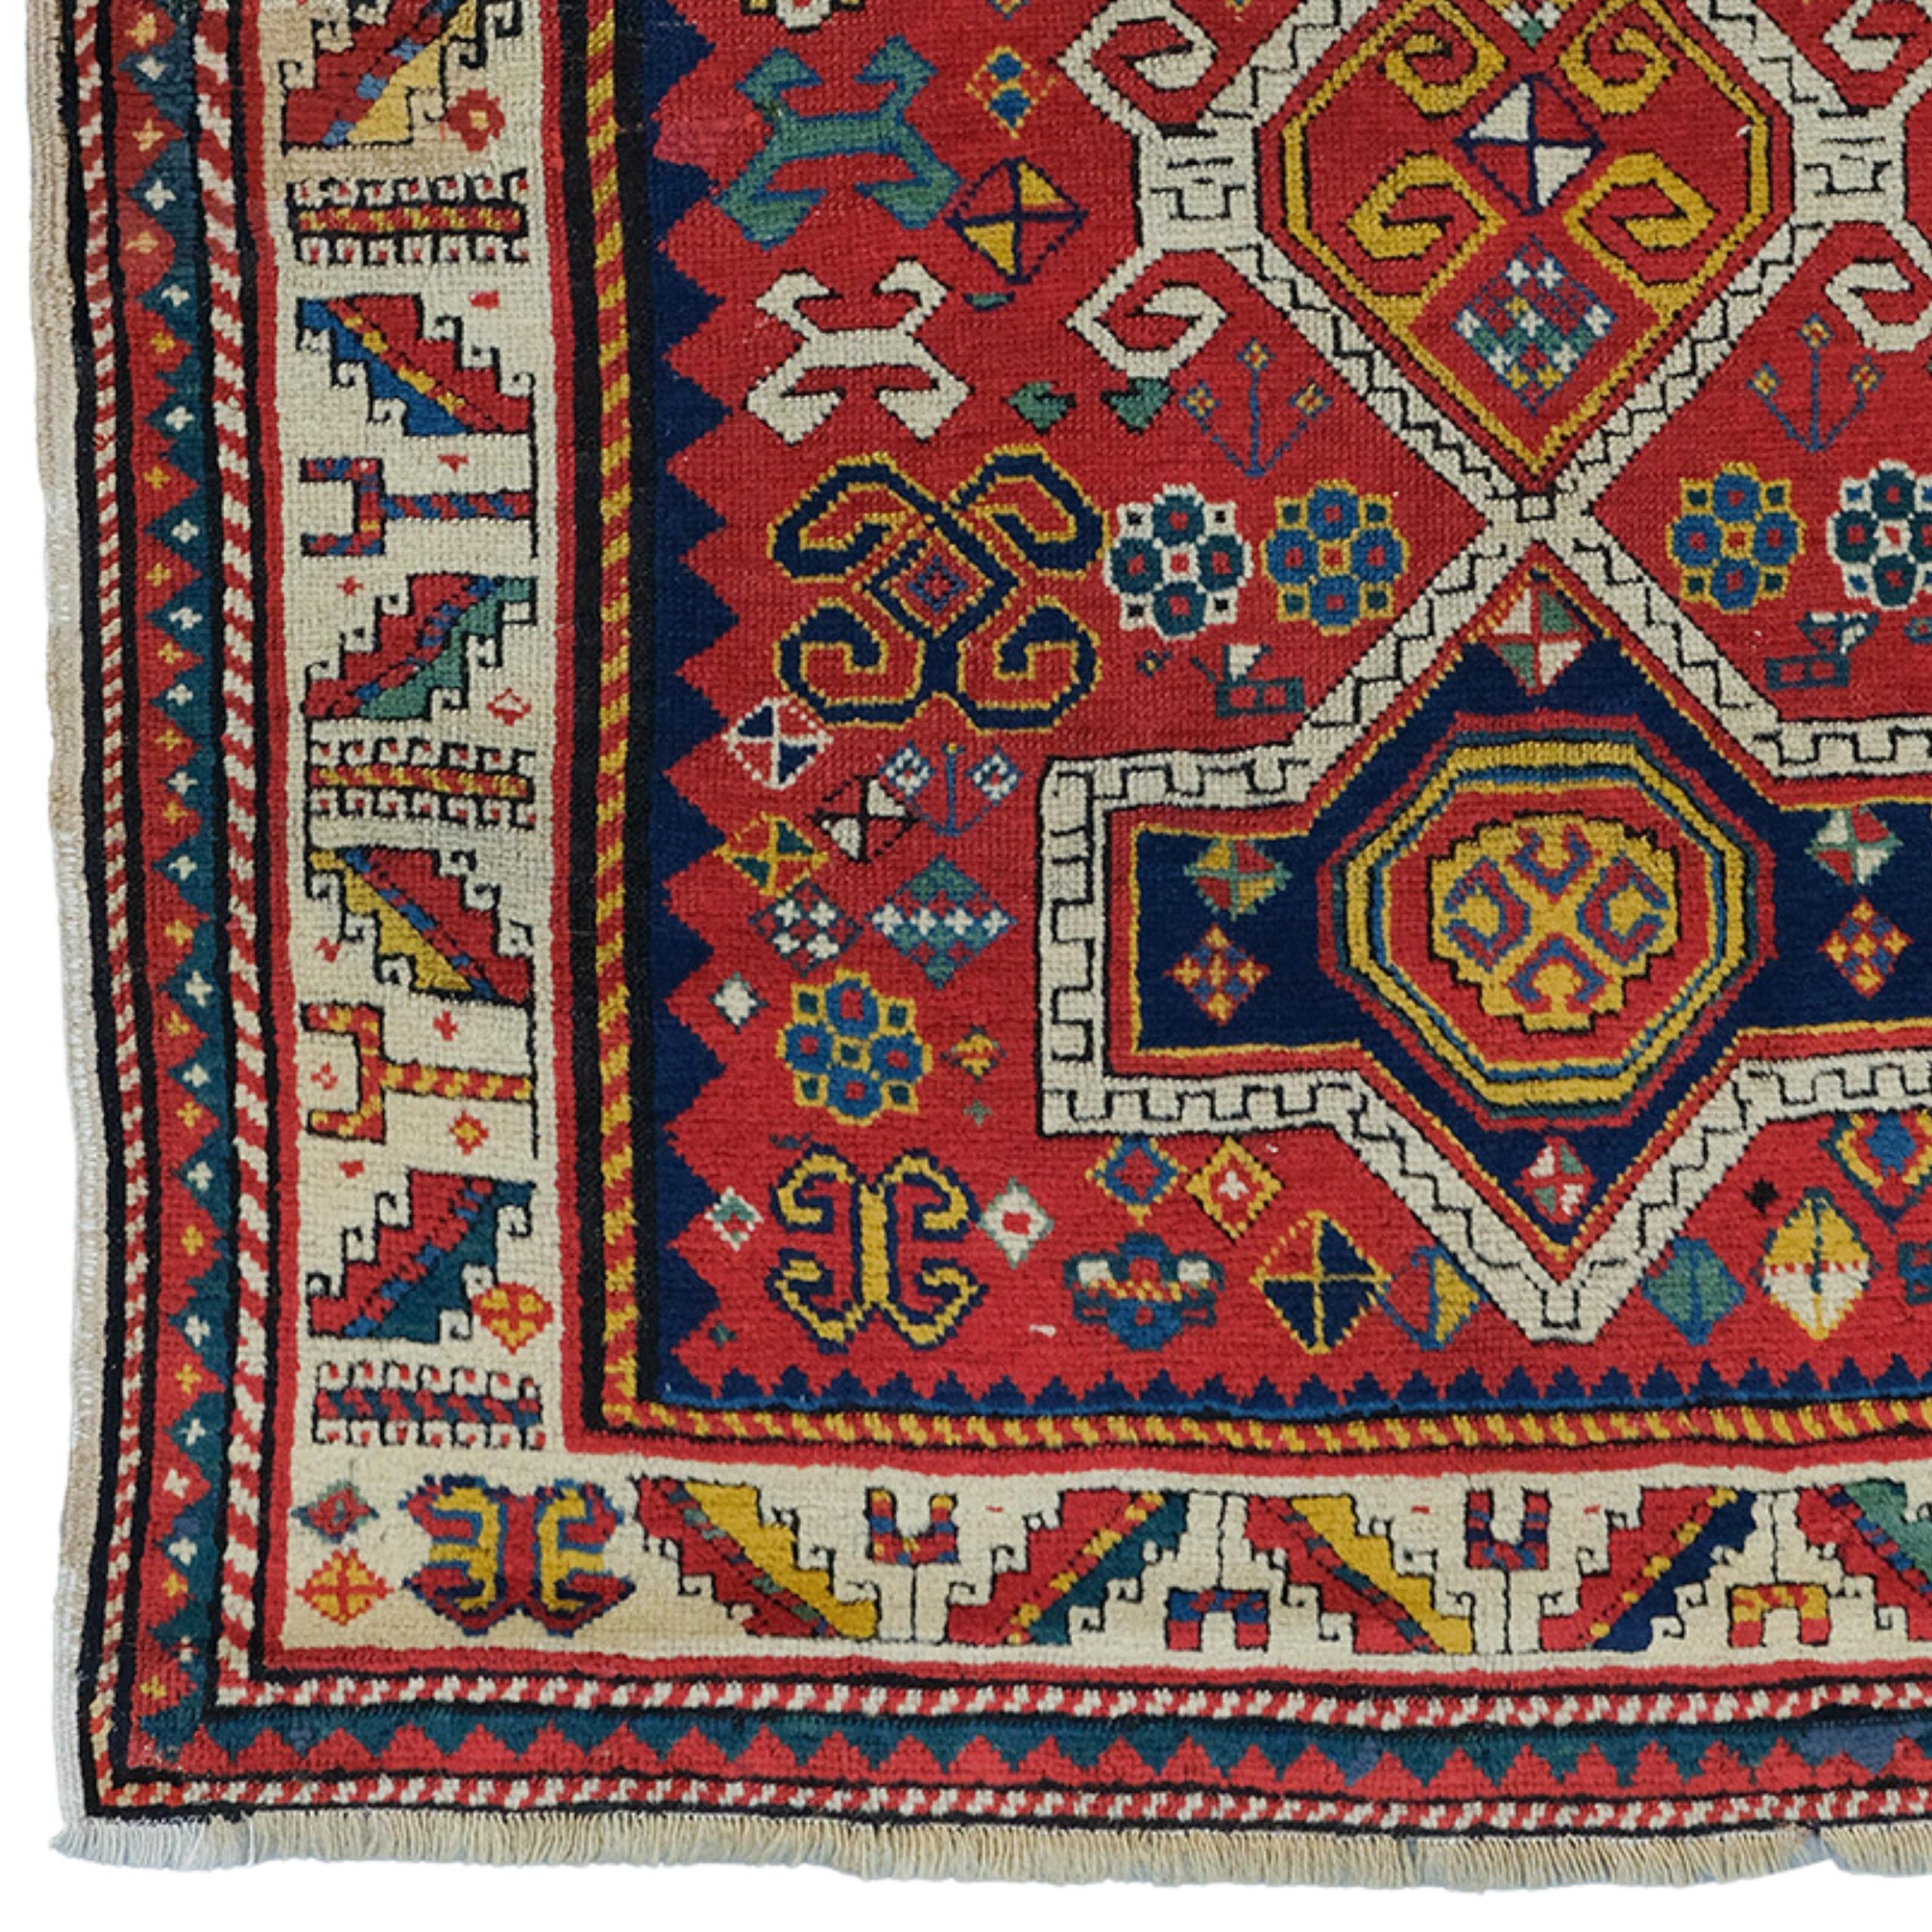 A Historical Heritage: 19th Century Caucasian Carpet

If you want to add historical and artistic value to your home, this antique carpet is for you. This carpet is a Caucasian carpet from the 19th century. Caucasian carpets are colorful, patterned